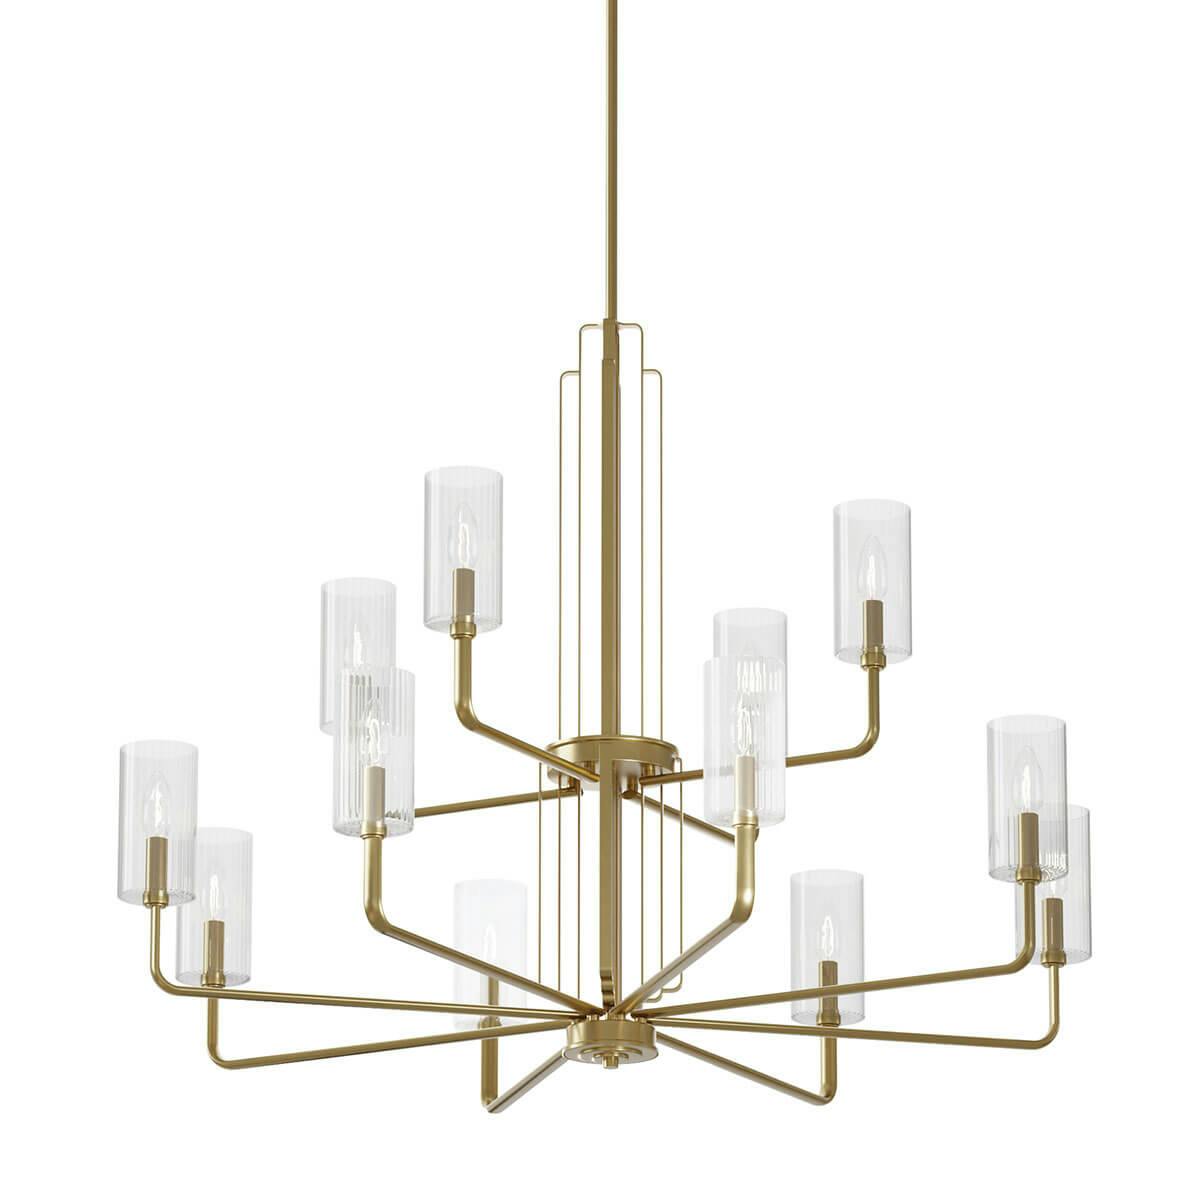 Kimrose 12 Light Chandelier Brass without the canopy on a white background